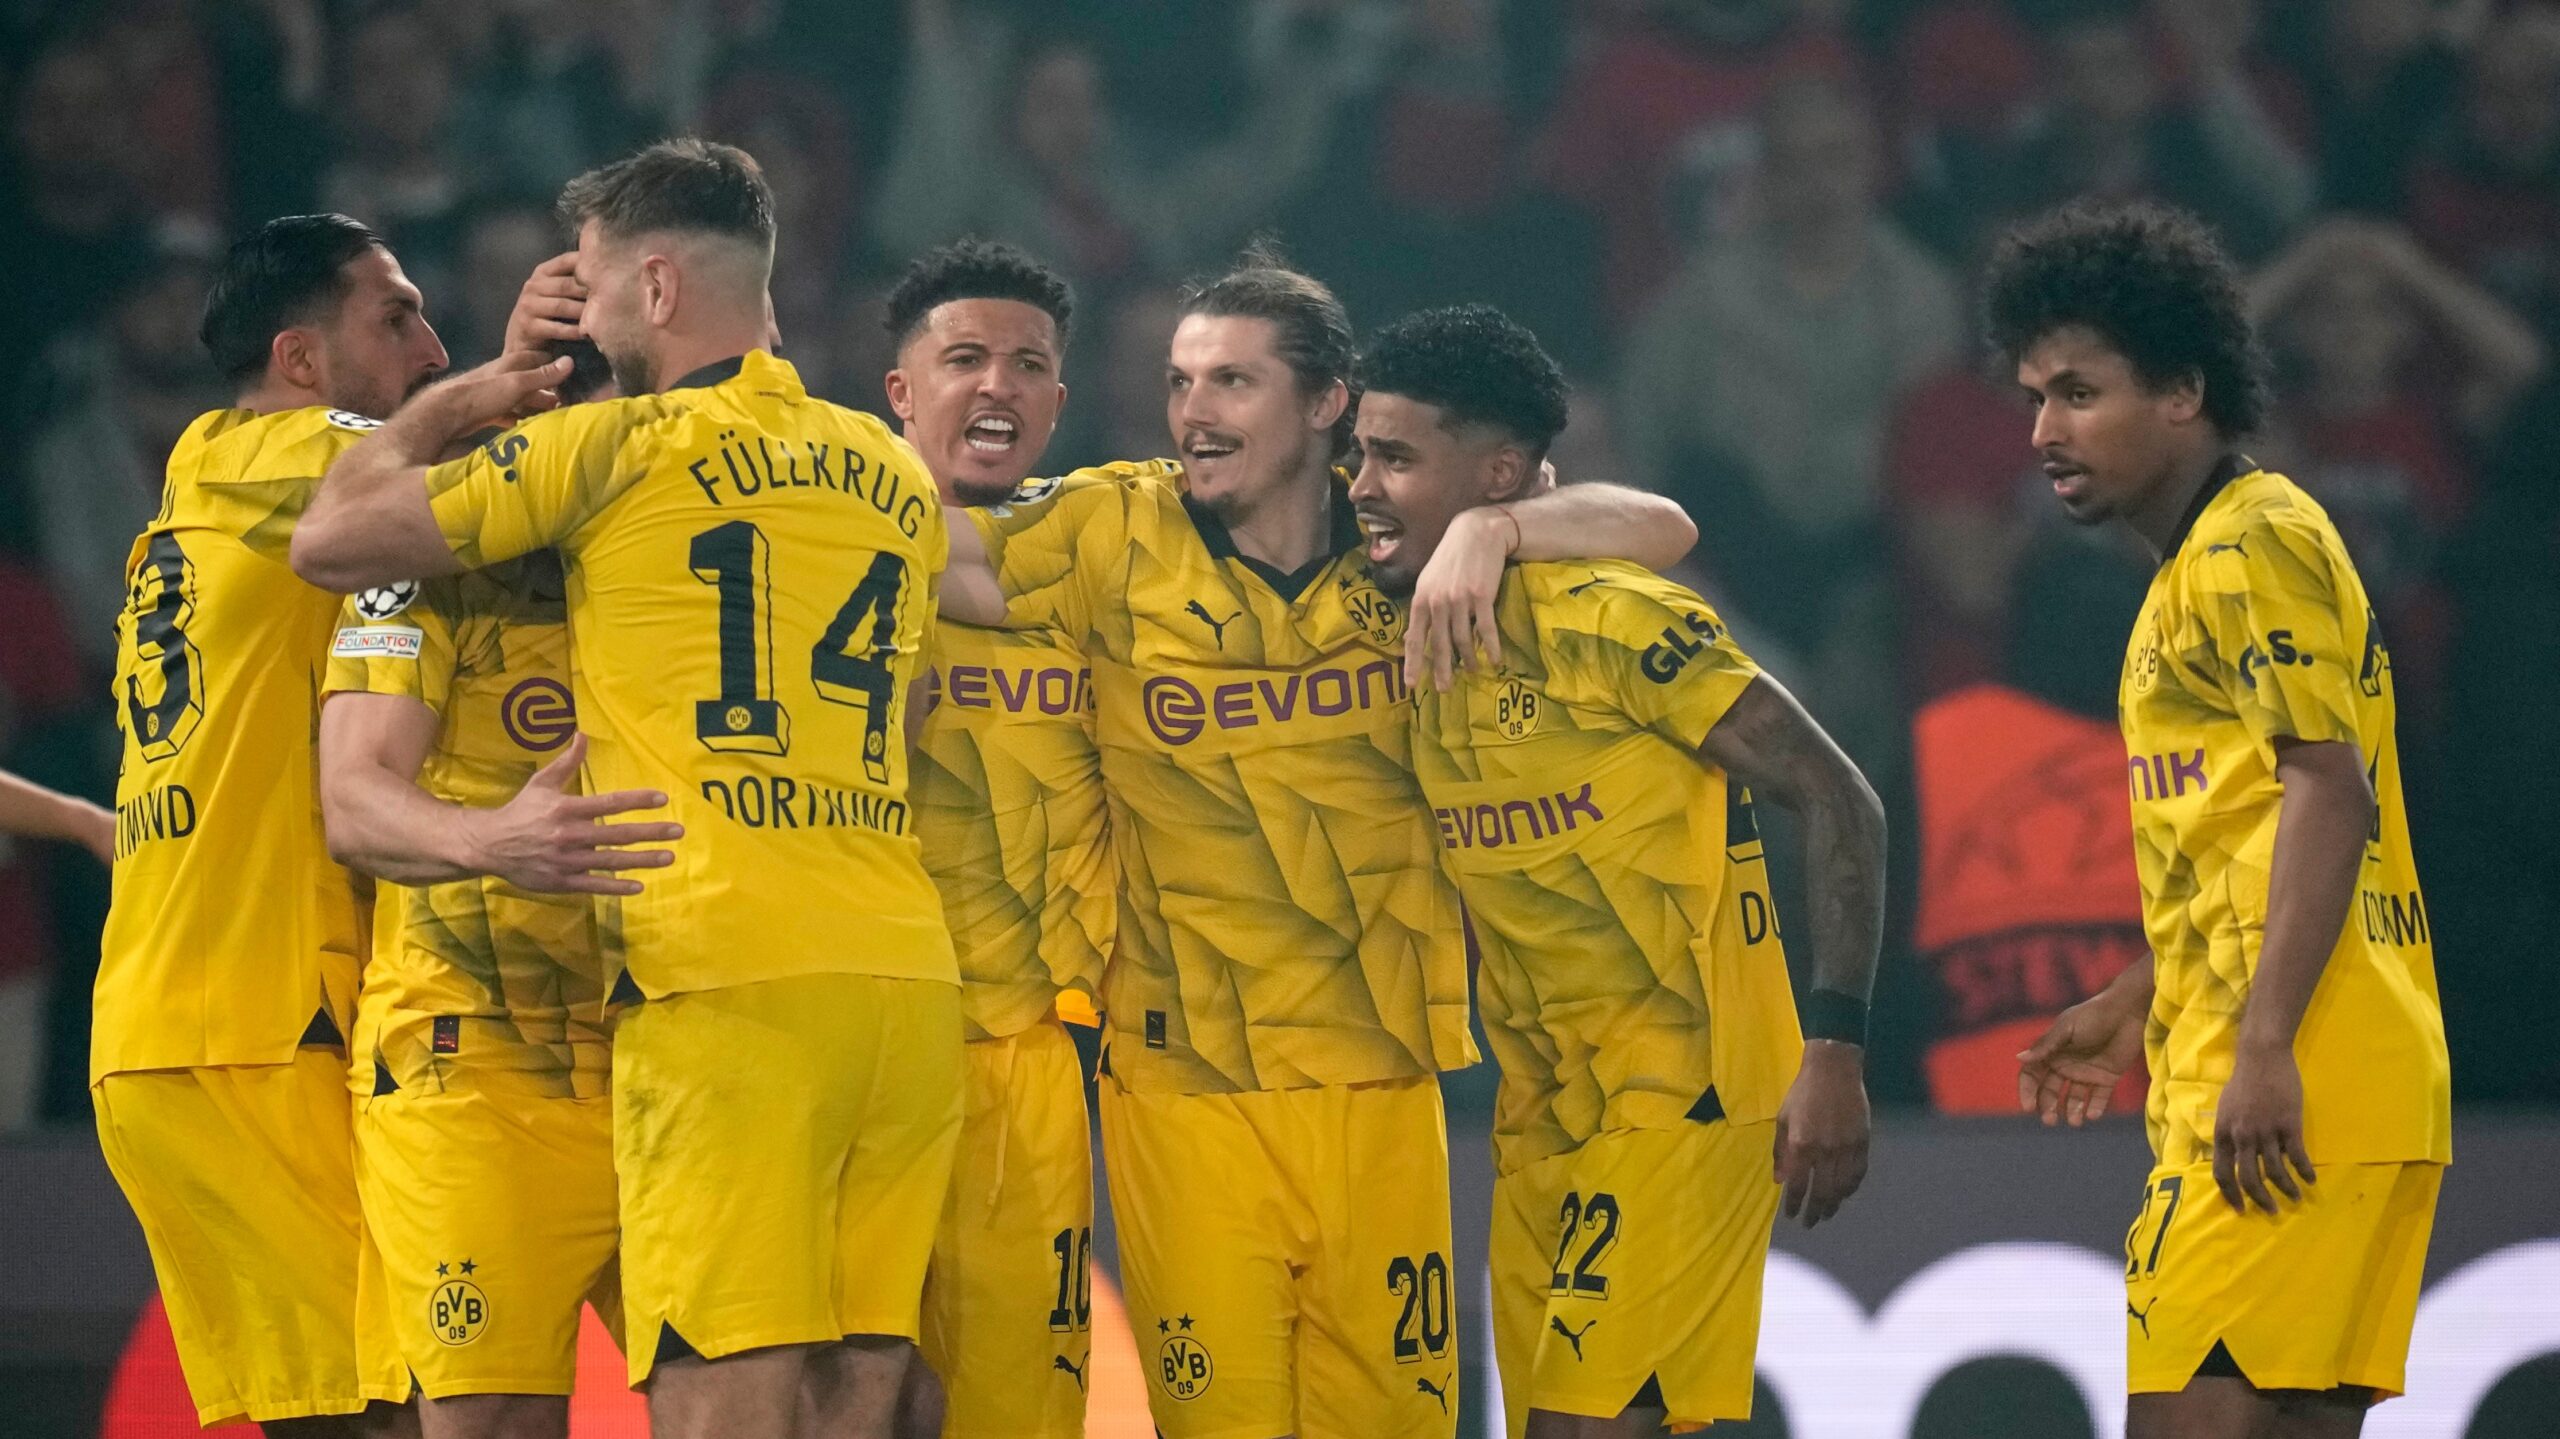 Borussia Dortmund reaches Champions League final by beating PSG on Hummels header